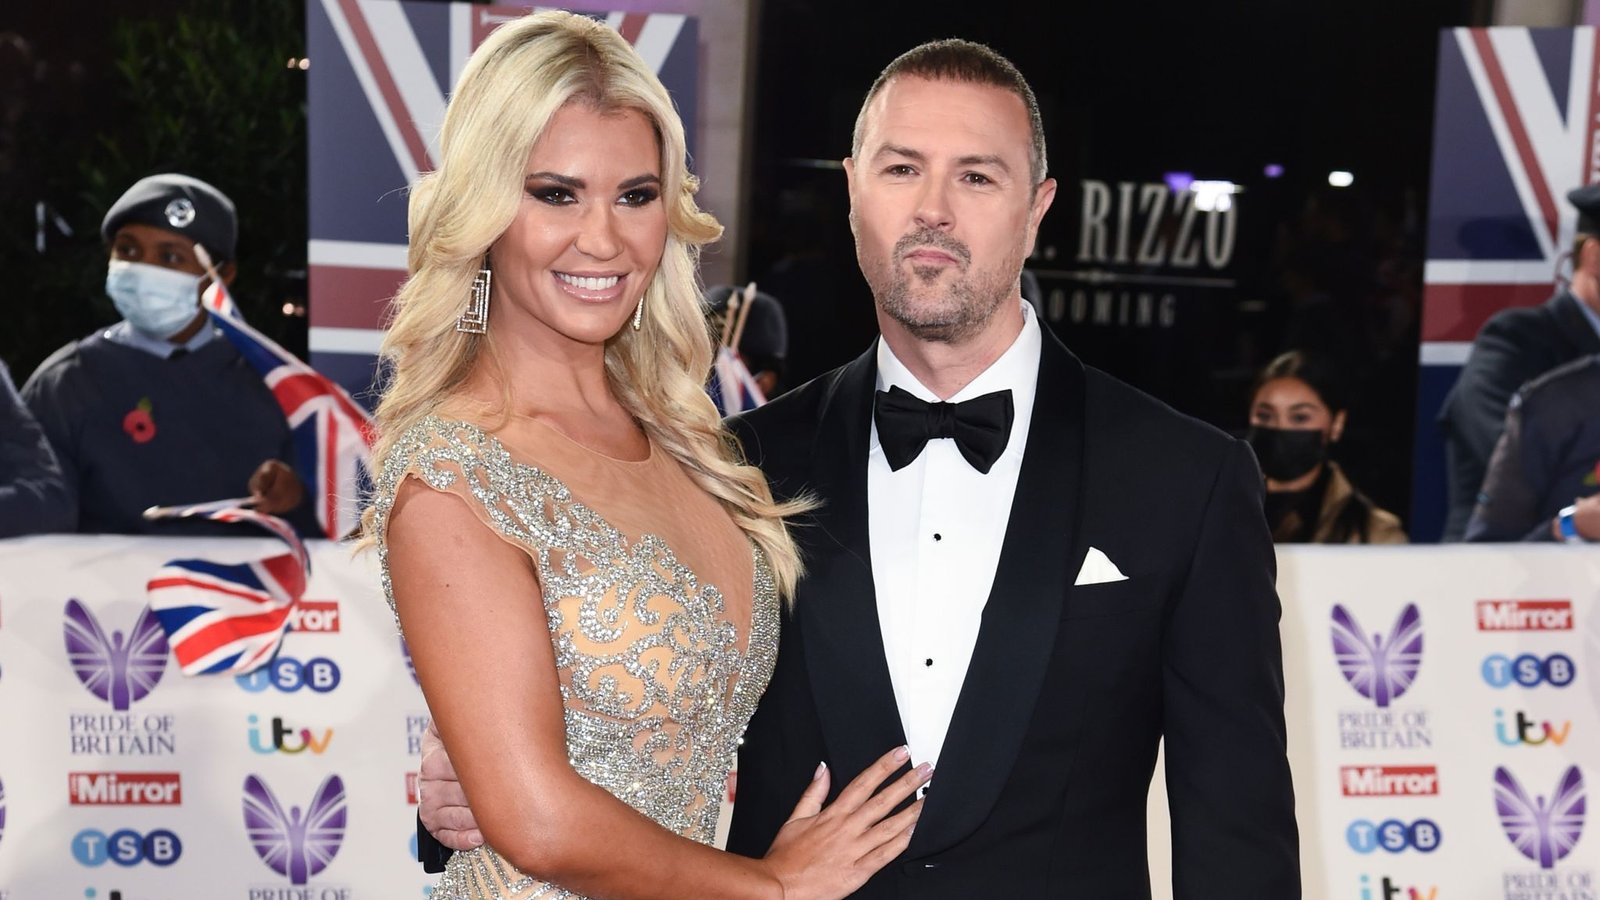 Christine McGuinness discloses her inner turmoil and “meltdowns.” Following her divorce from spouse Paddy